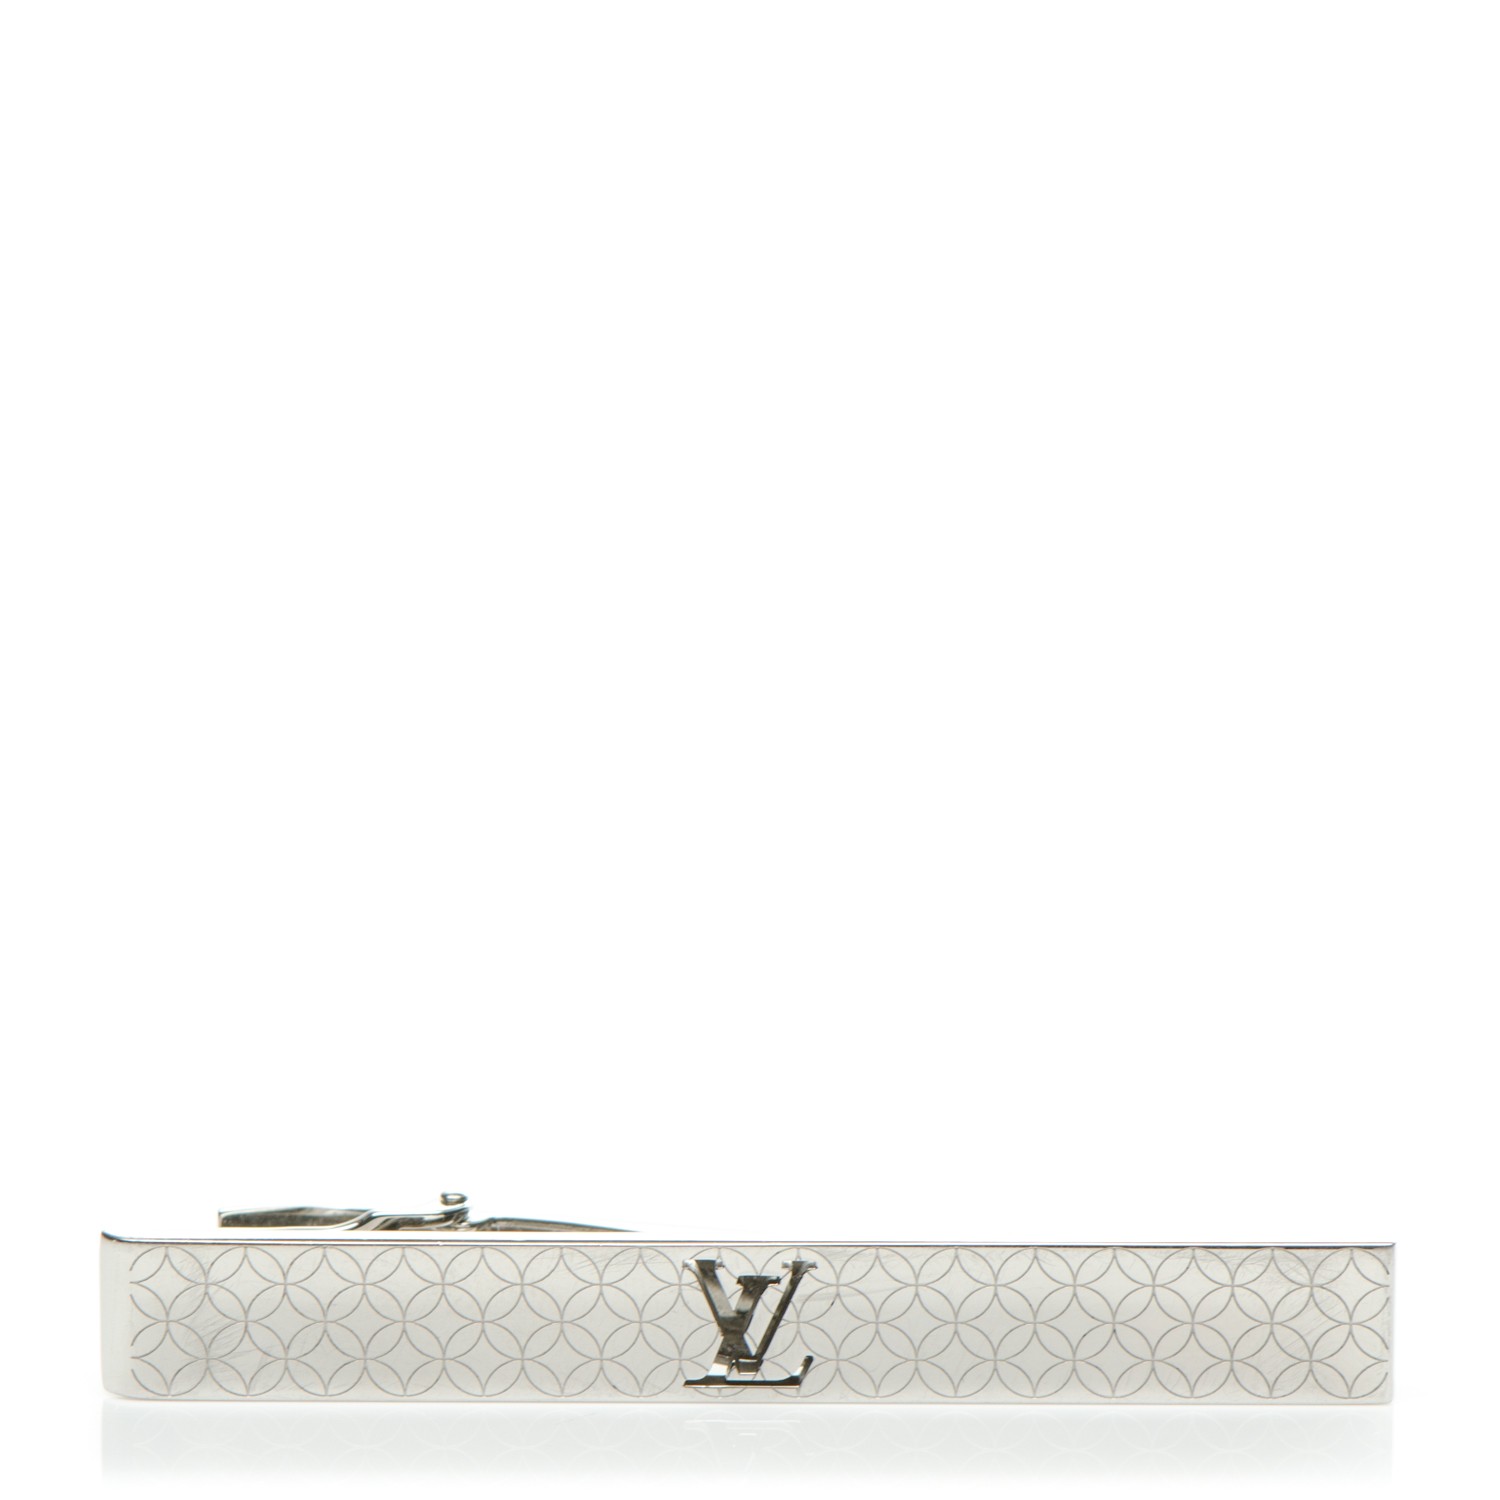 VUITTON Champs Elysees Tie Pin 179808 FASHIONPHILE